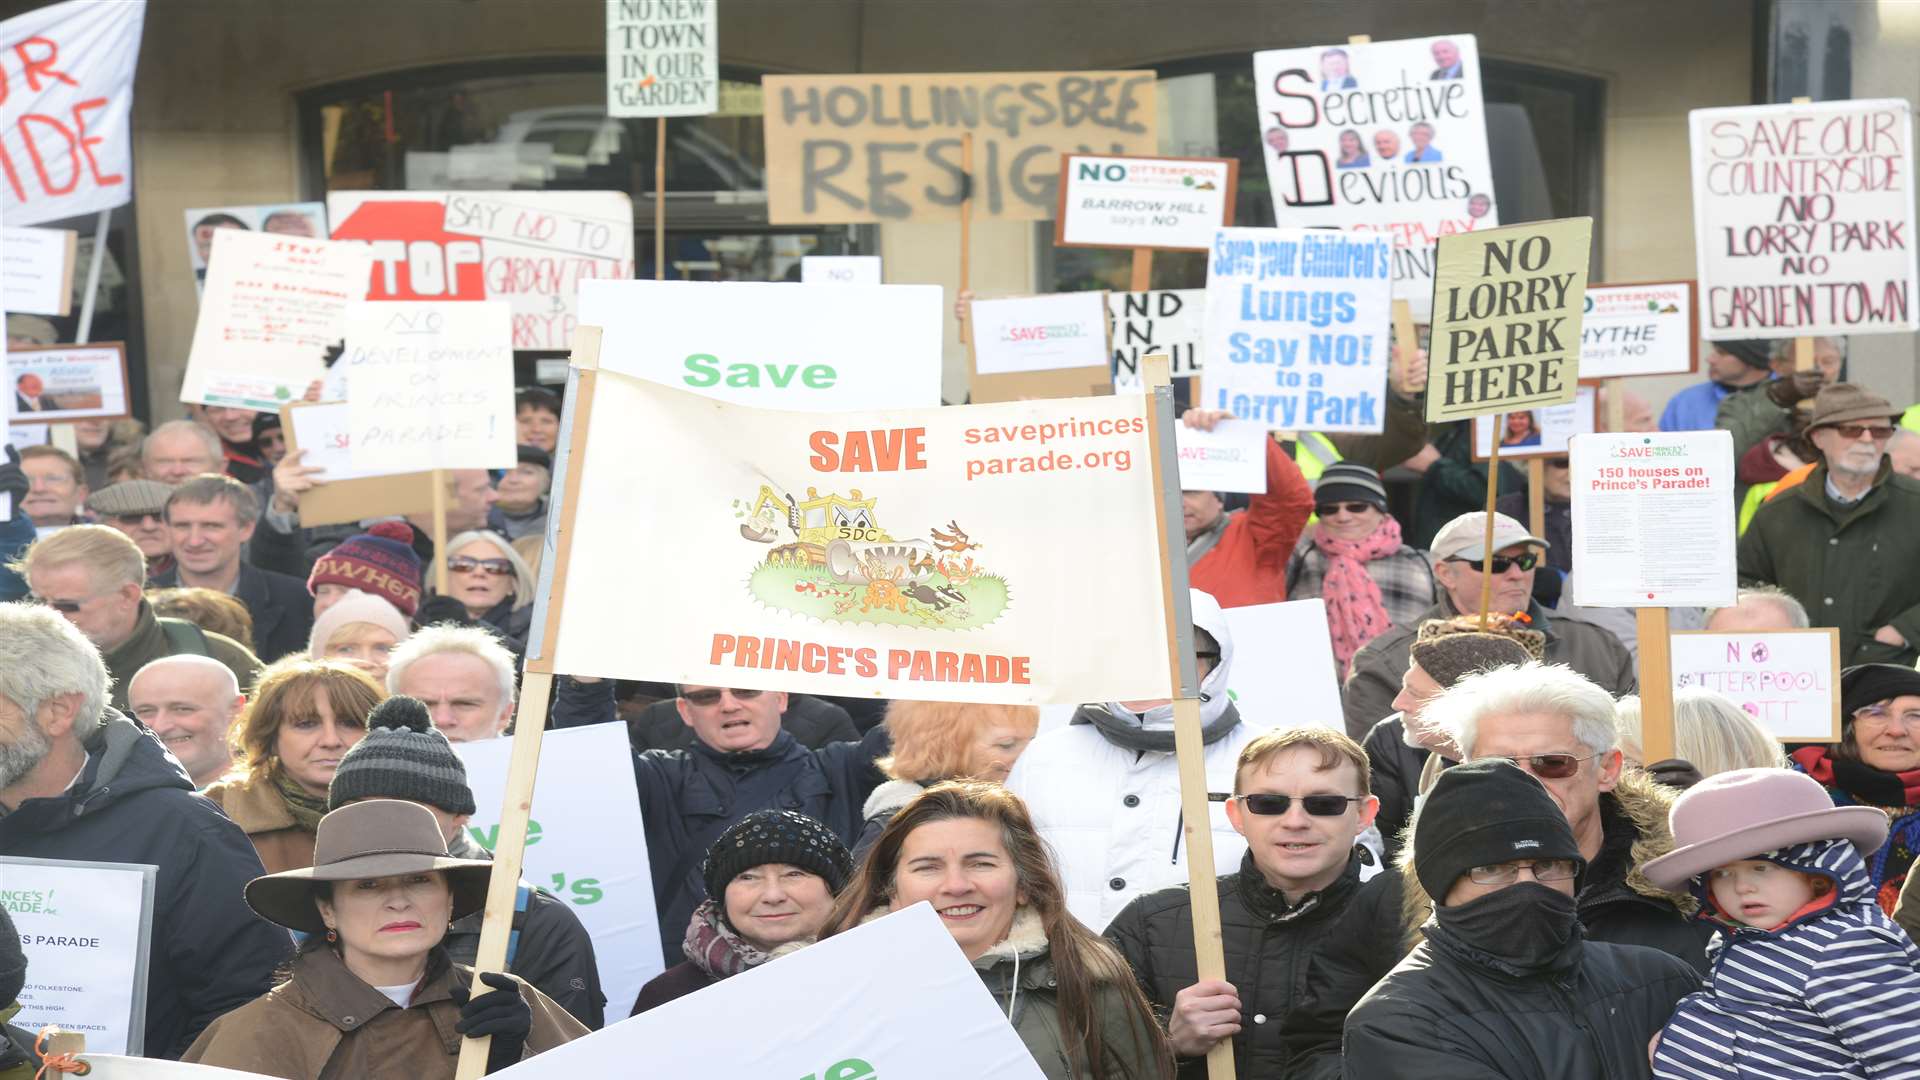 Protest march against development in Shepway held in December at the Civic Centre in Folkestone